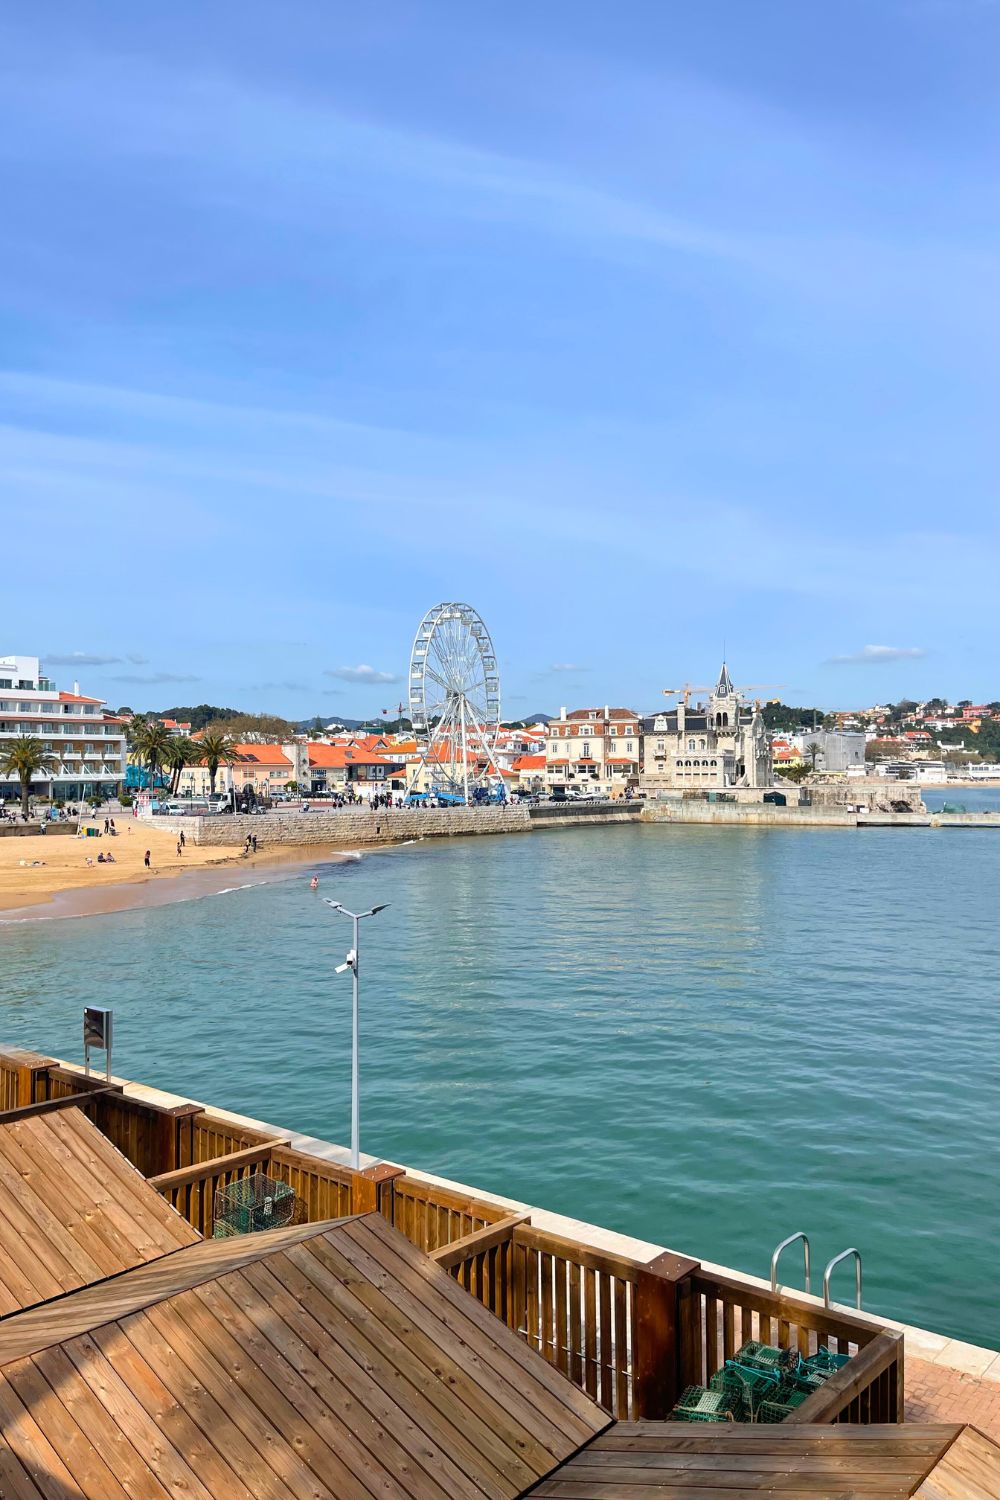 A serene waterfront view in Cascais, Portugal, with a picturesque Ferris wheel towering over the beach and town. The clear blue sky is reflected in the tranquil waters, and the wooden deck in the foreground adds a warm, inviting touch to the scenic coastal panorama.